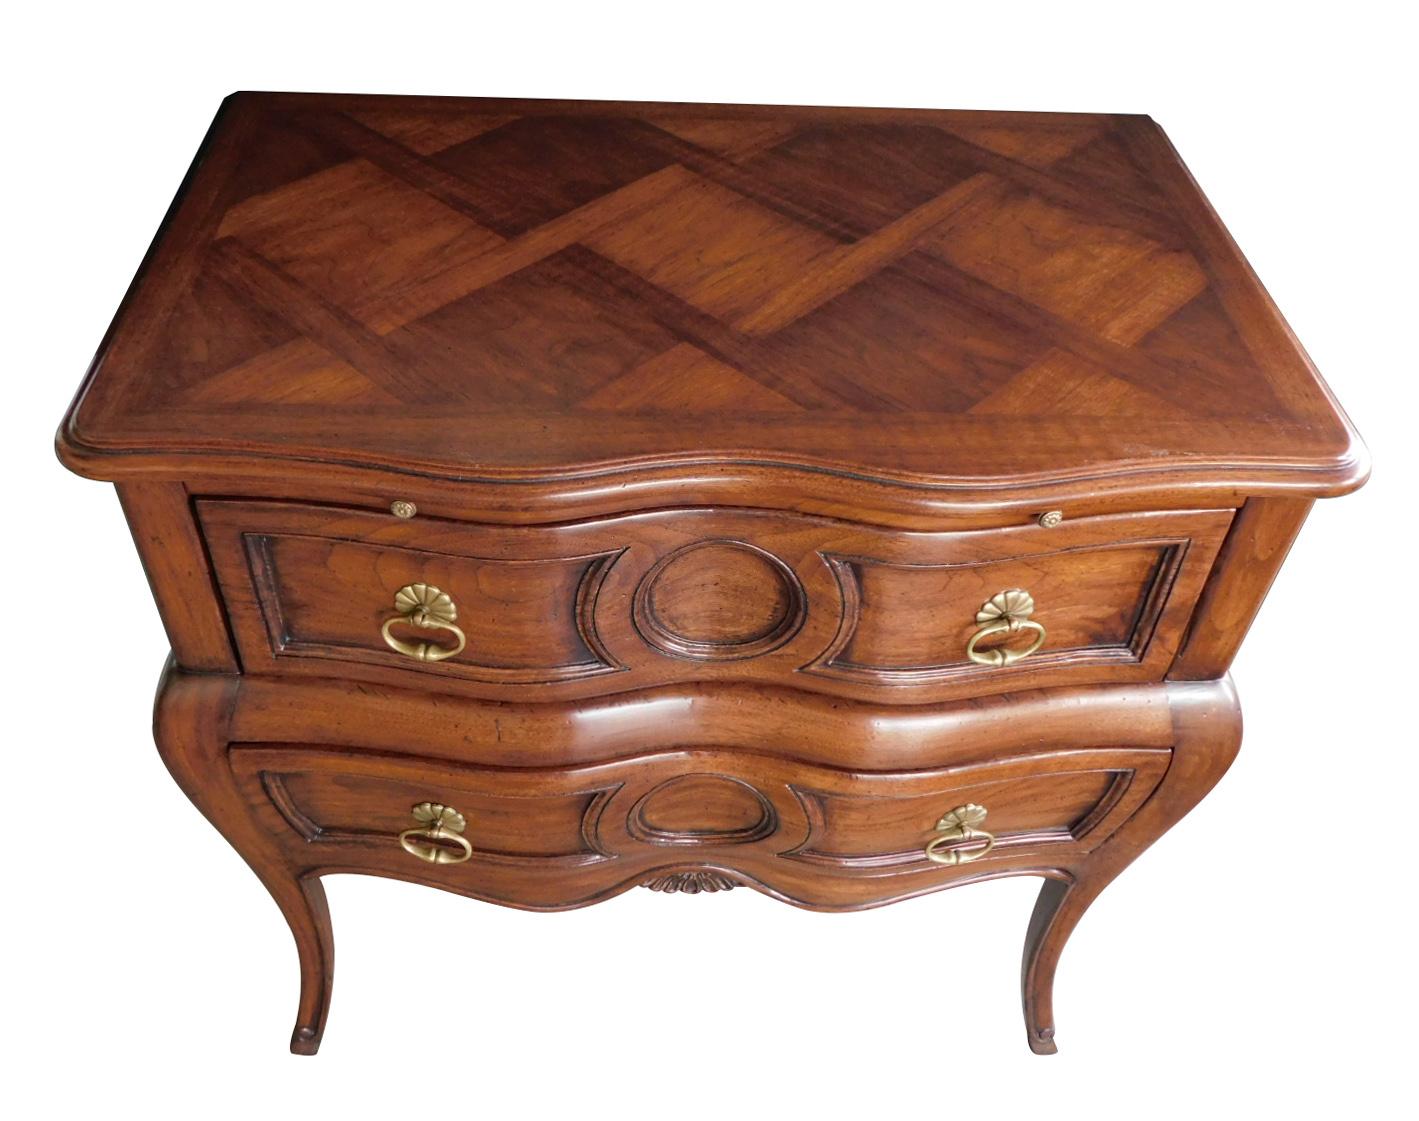 Rococo Revival Good Quality Walnut Bombé-form 2-drawer Chest by Auffray & Co., NY